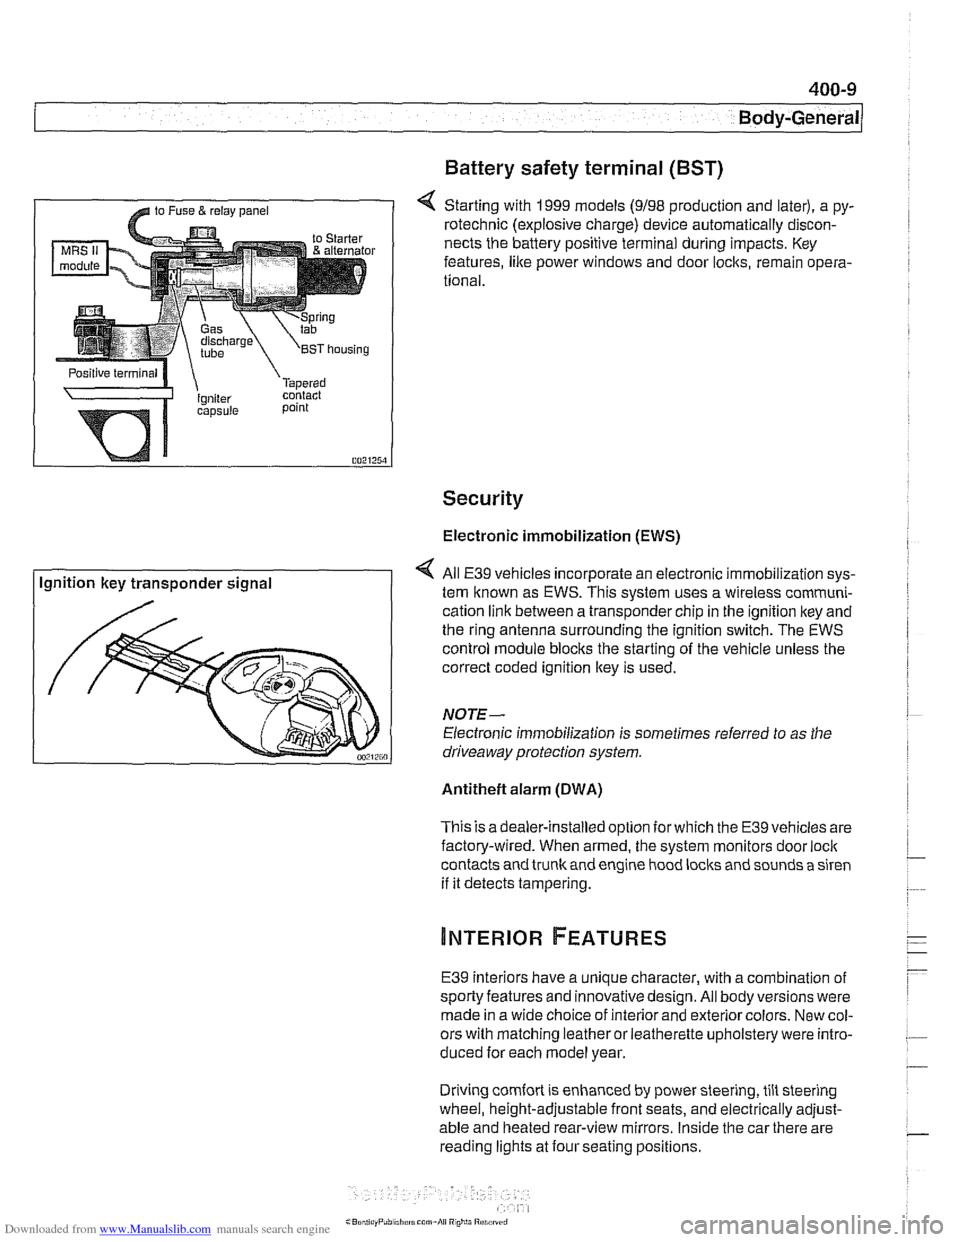 BMW 528i 1999 E39 Workshop Manual Downloaded from www.Manualslib.com manuals search engine 
400-9 
Body-General 
Battery  safety terminal 
(BST) 
4 Starting  with 1999 models (9198 production  and later), a py- 
rotechnic  (explosive 